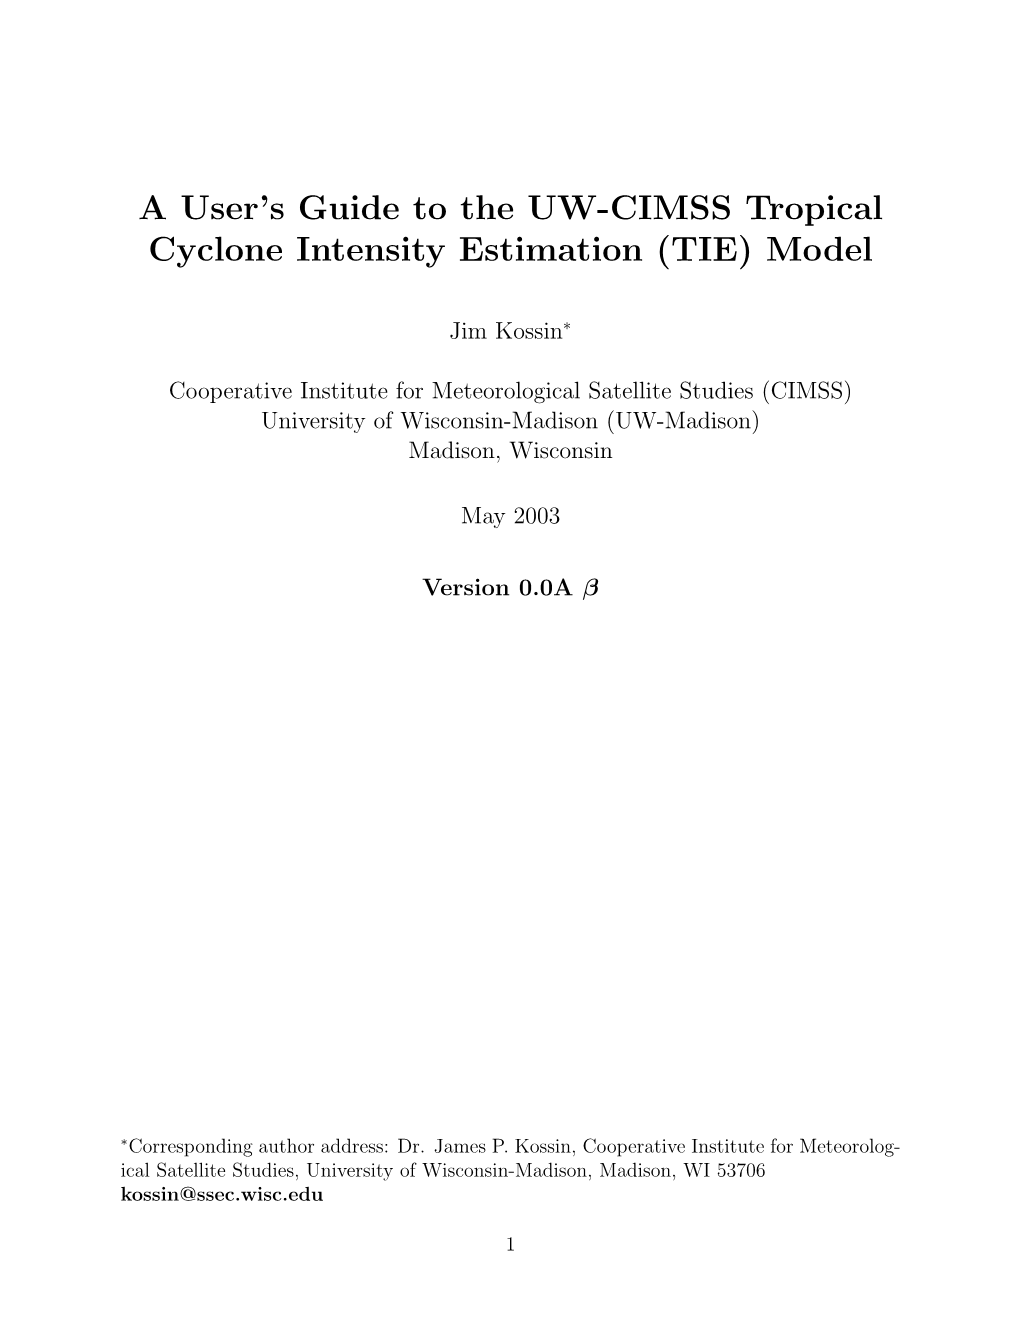 A User's Guide to the UW-CIMSS Tropical Cyclone Intensity